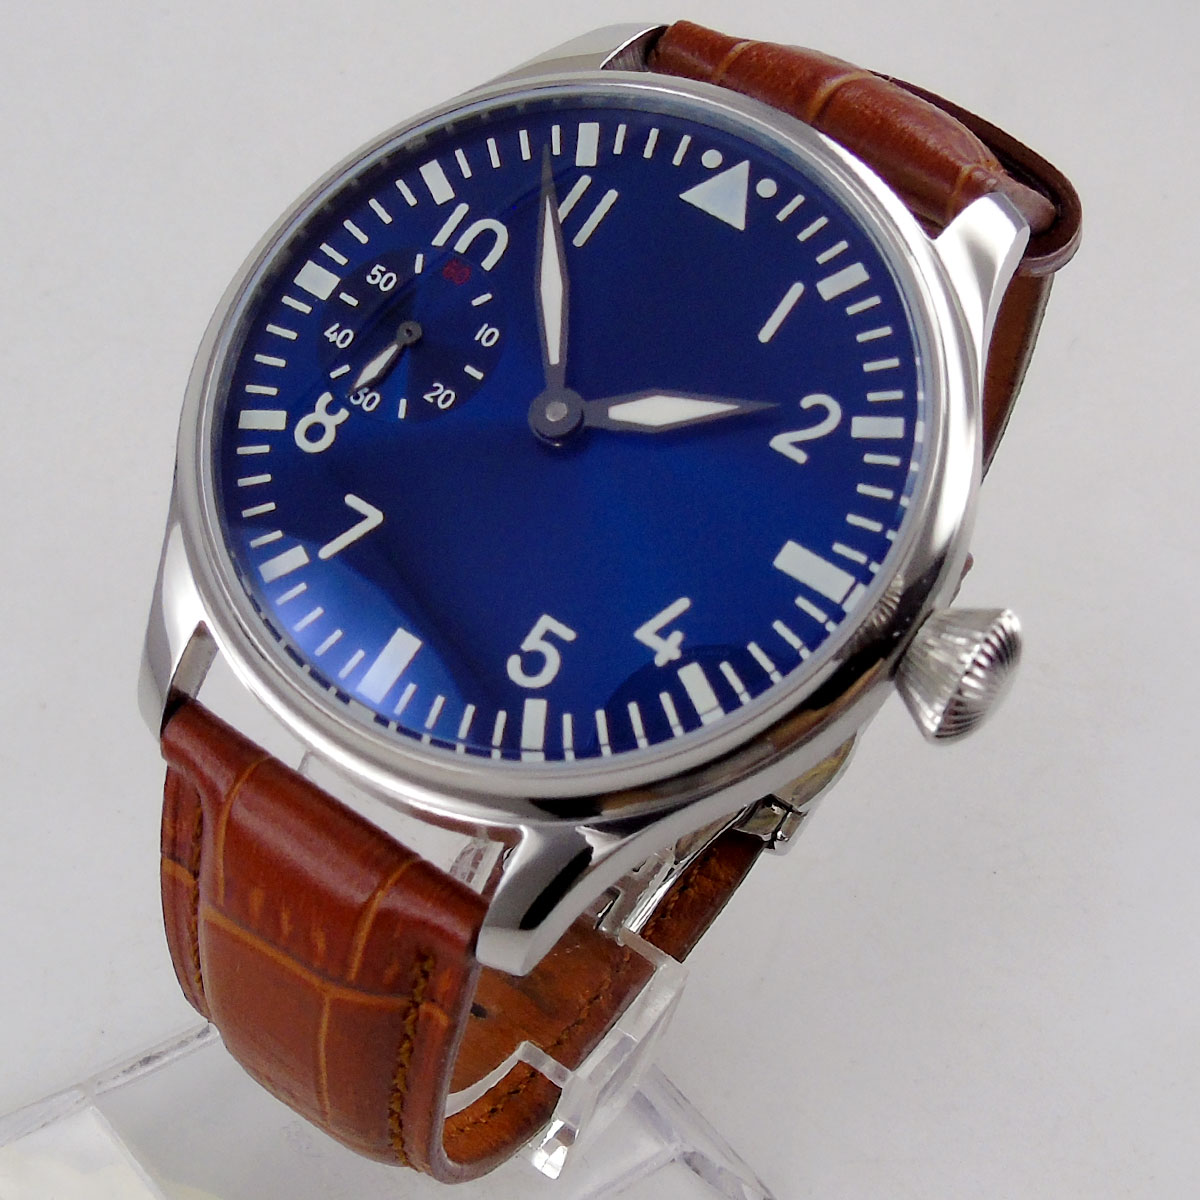 Parnis PA6035 chinese mechanical watches sale online – iluwatch.com